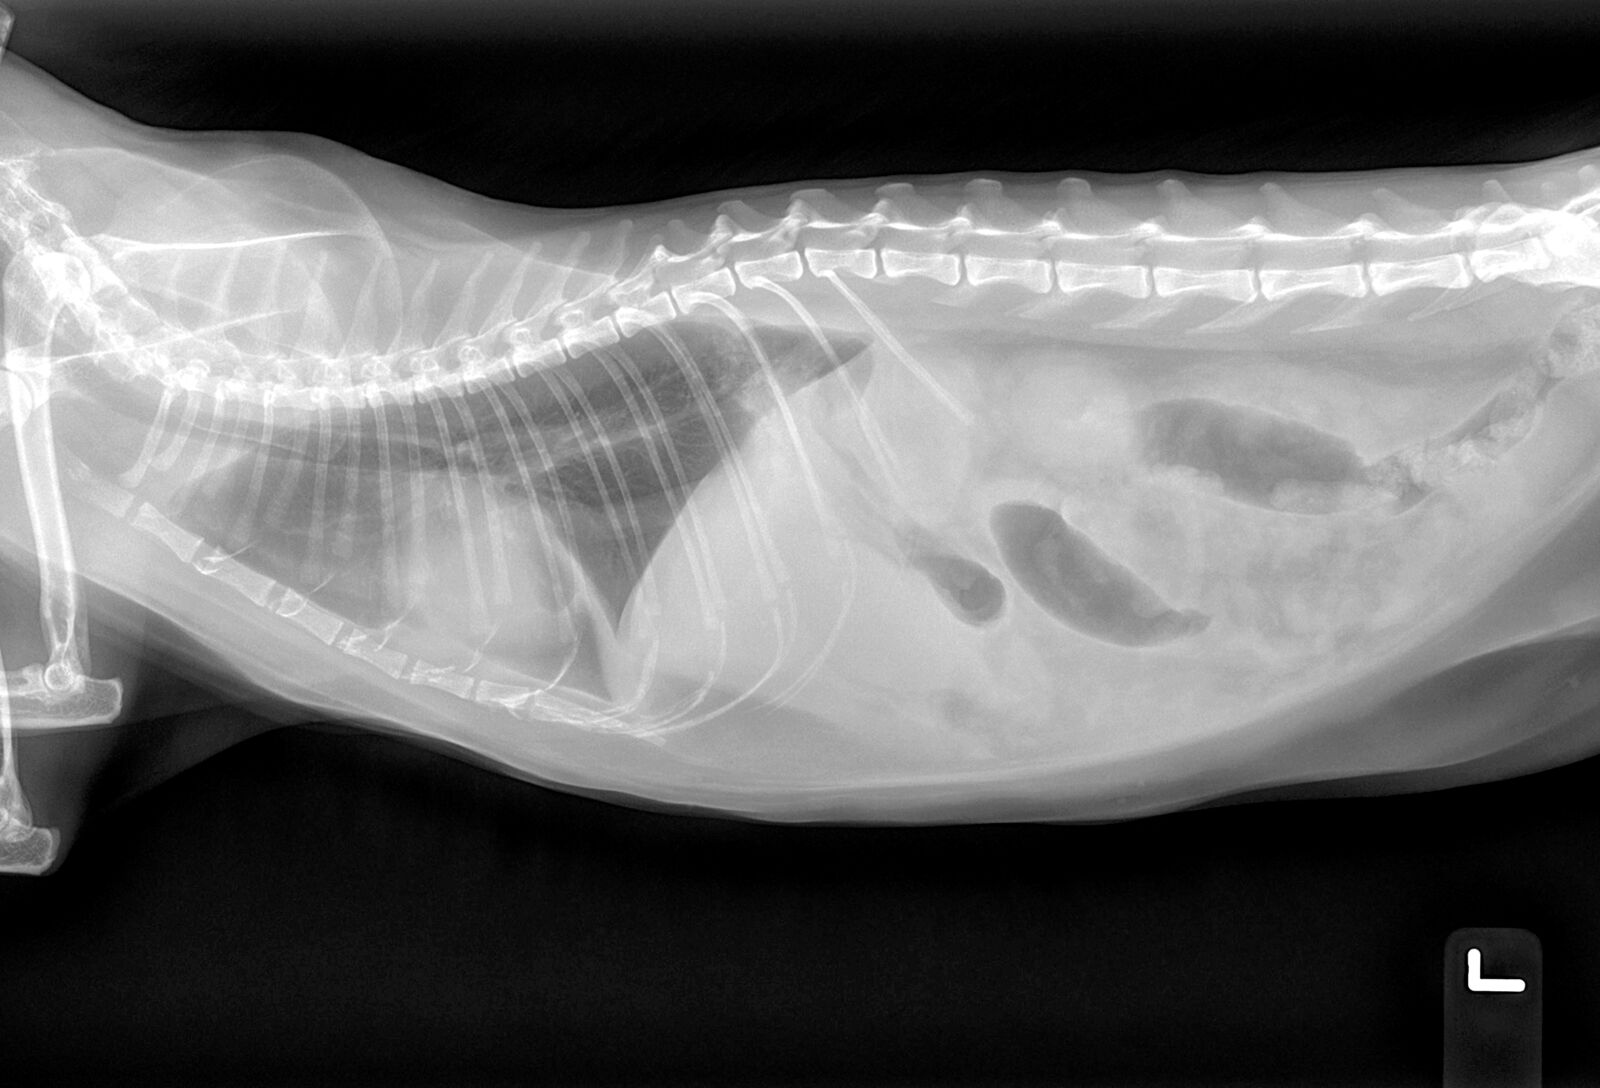 A lateral radiograph of a cat showing loss of serosal detail within the abdominal cavity. No pleural effusion, overt cardiomegaly or hepatomegaly can be appreciated